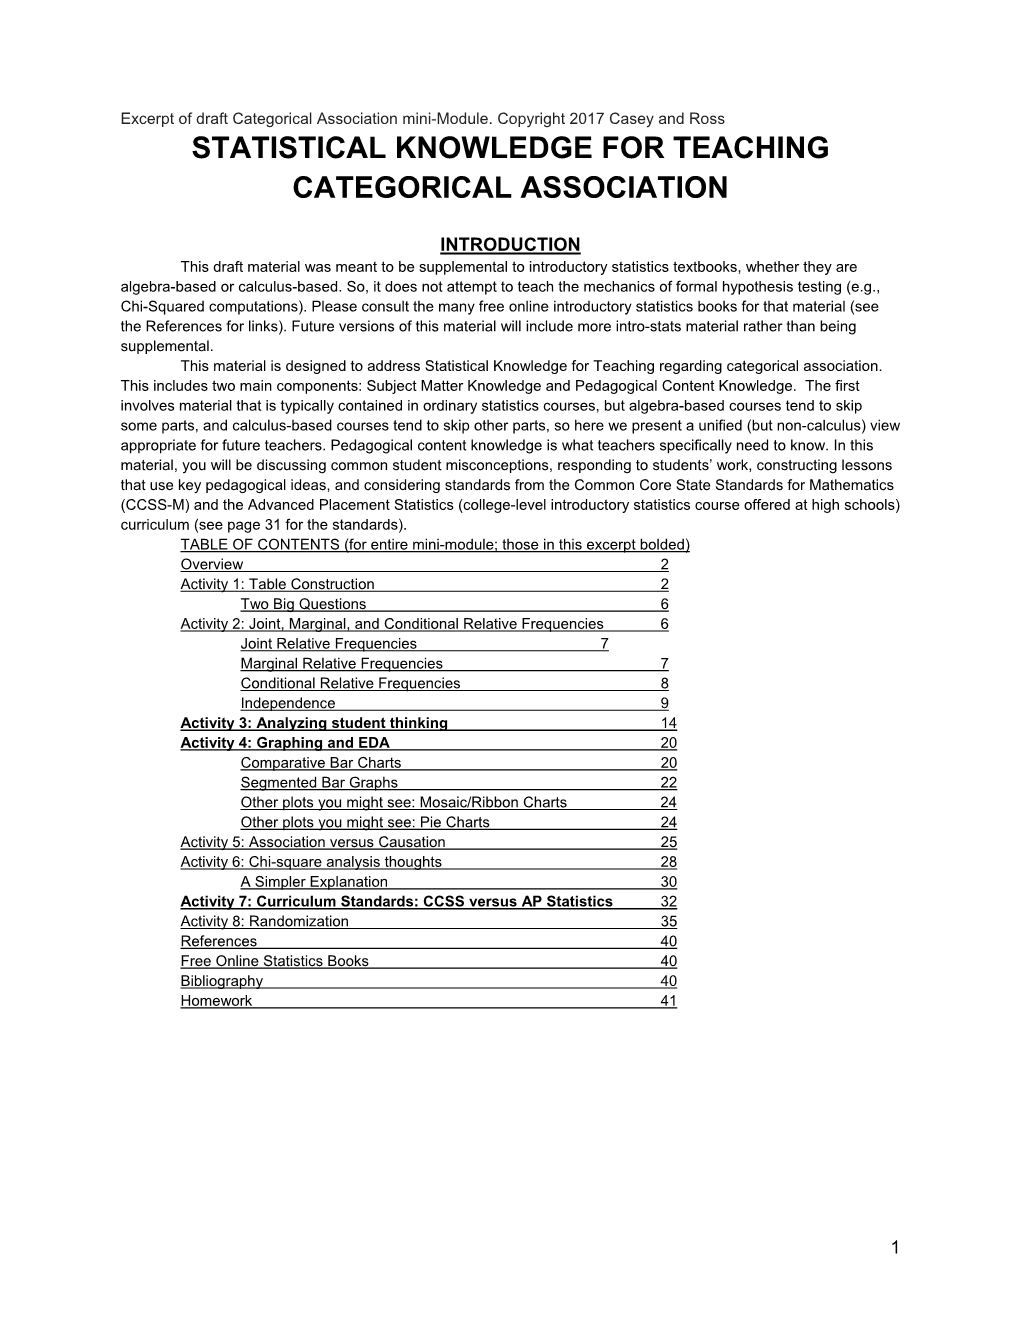 Statistical Knowledge for Teaching Categorical Association